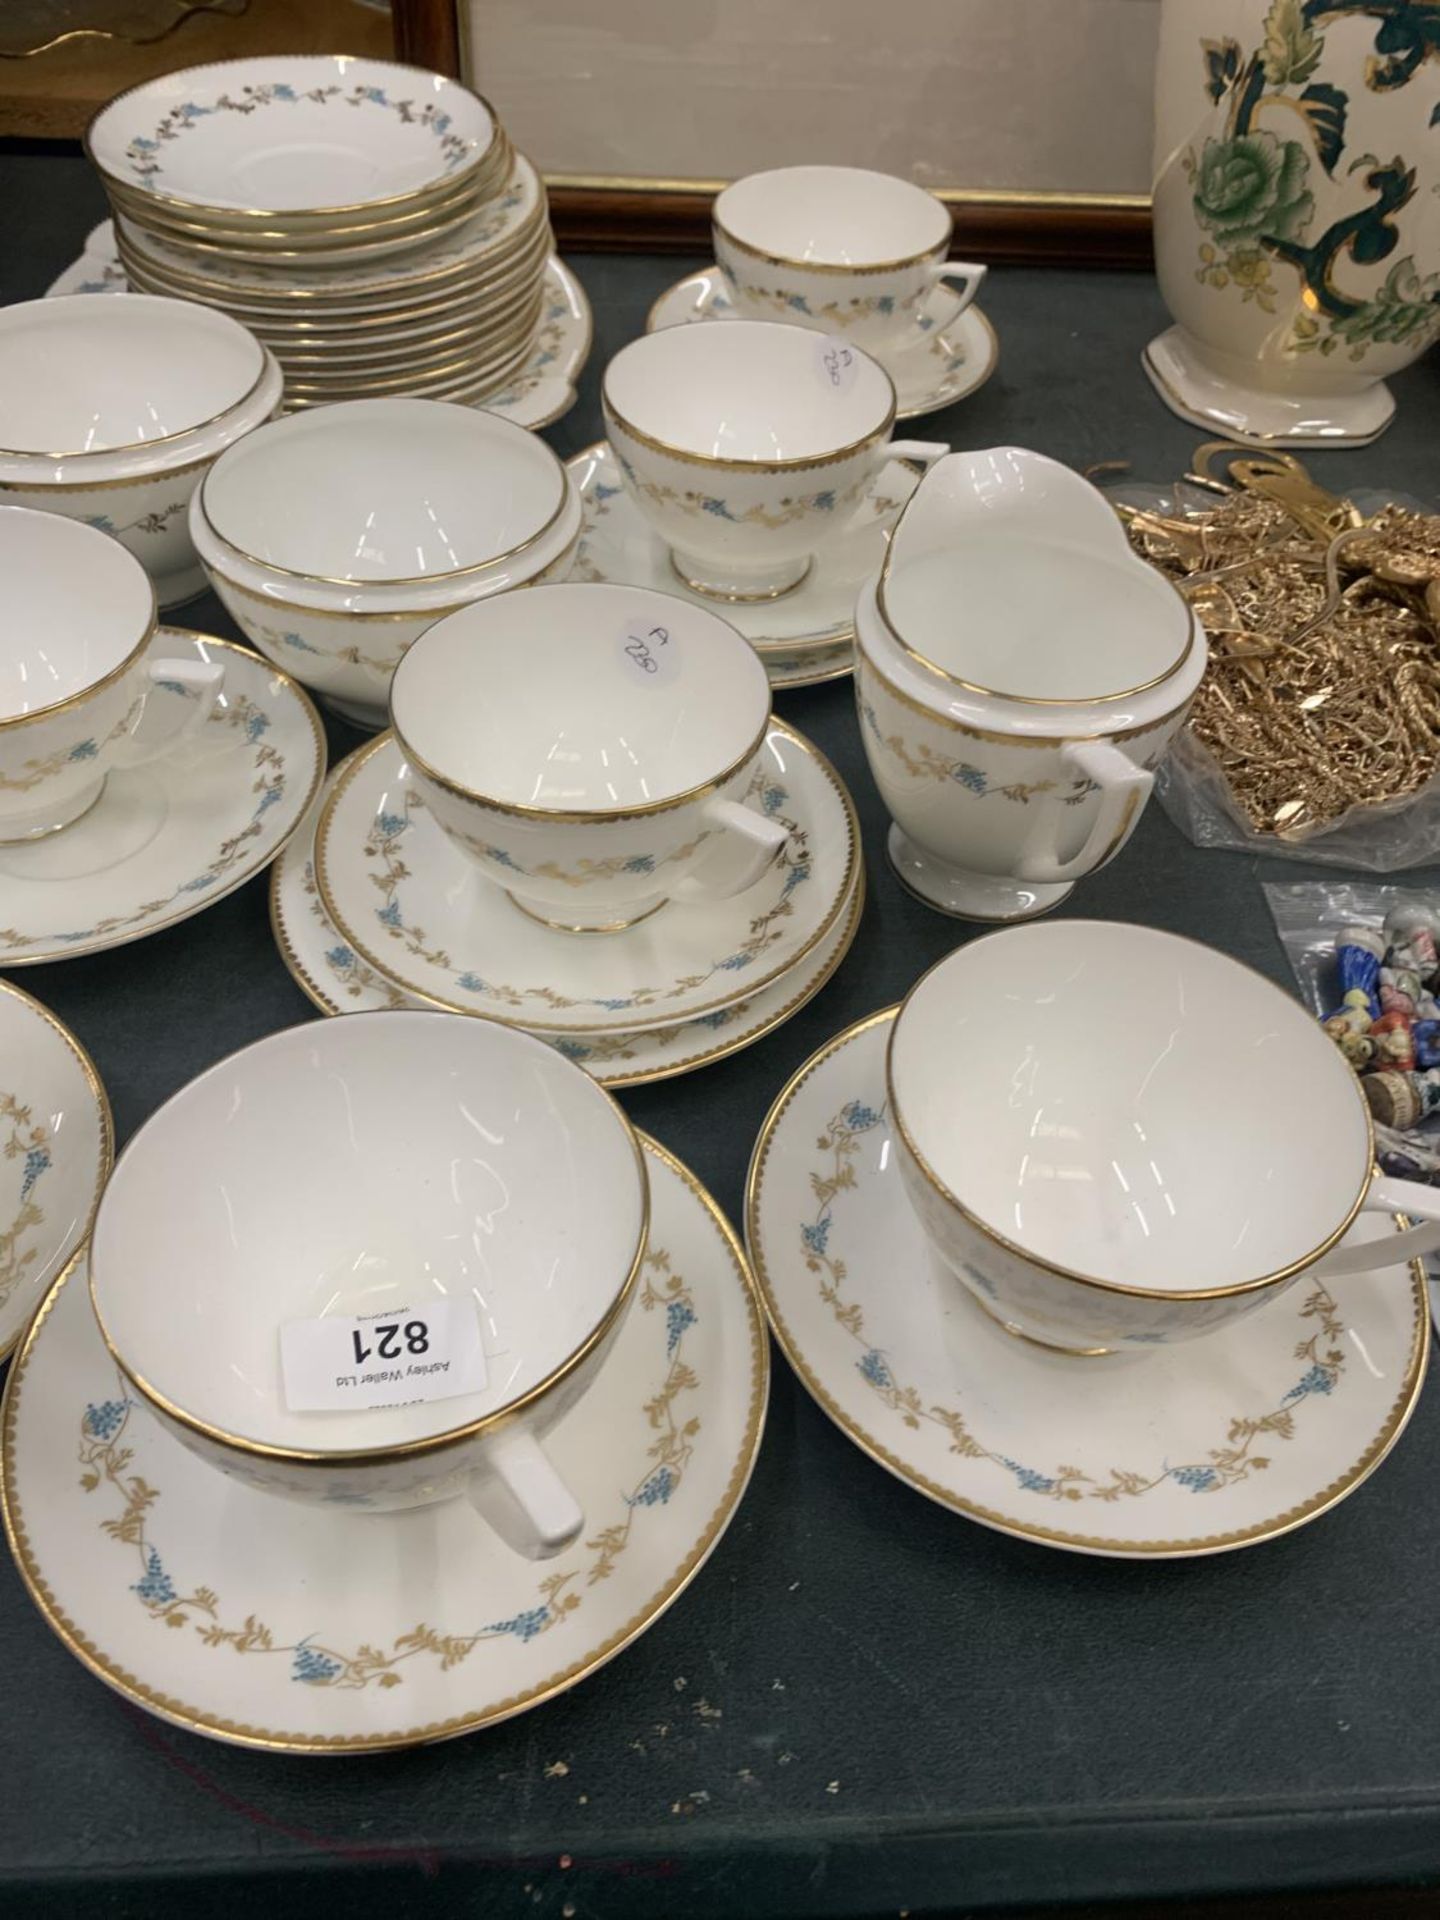 A MINTON 'CHAMPAGNE' TEASET TO INCLUDE A CAKE PLATE, CUPS, SAUCERS, SIDE PLATES, TWO CREAM JUGS - Image 3 of 4